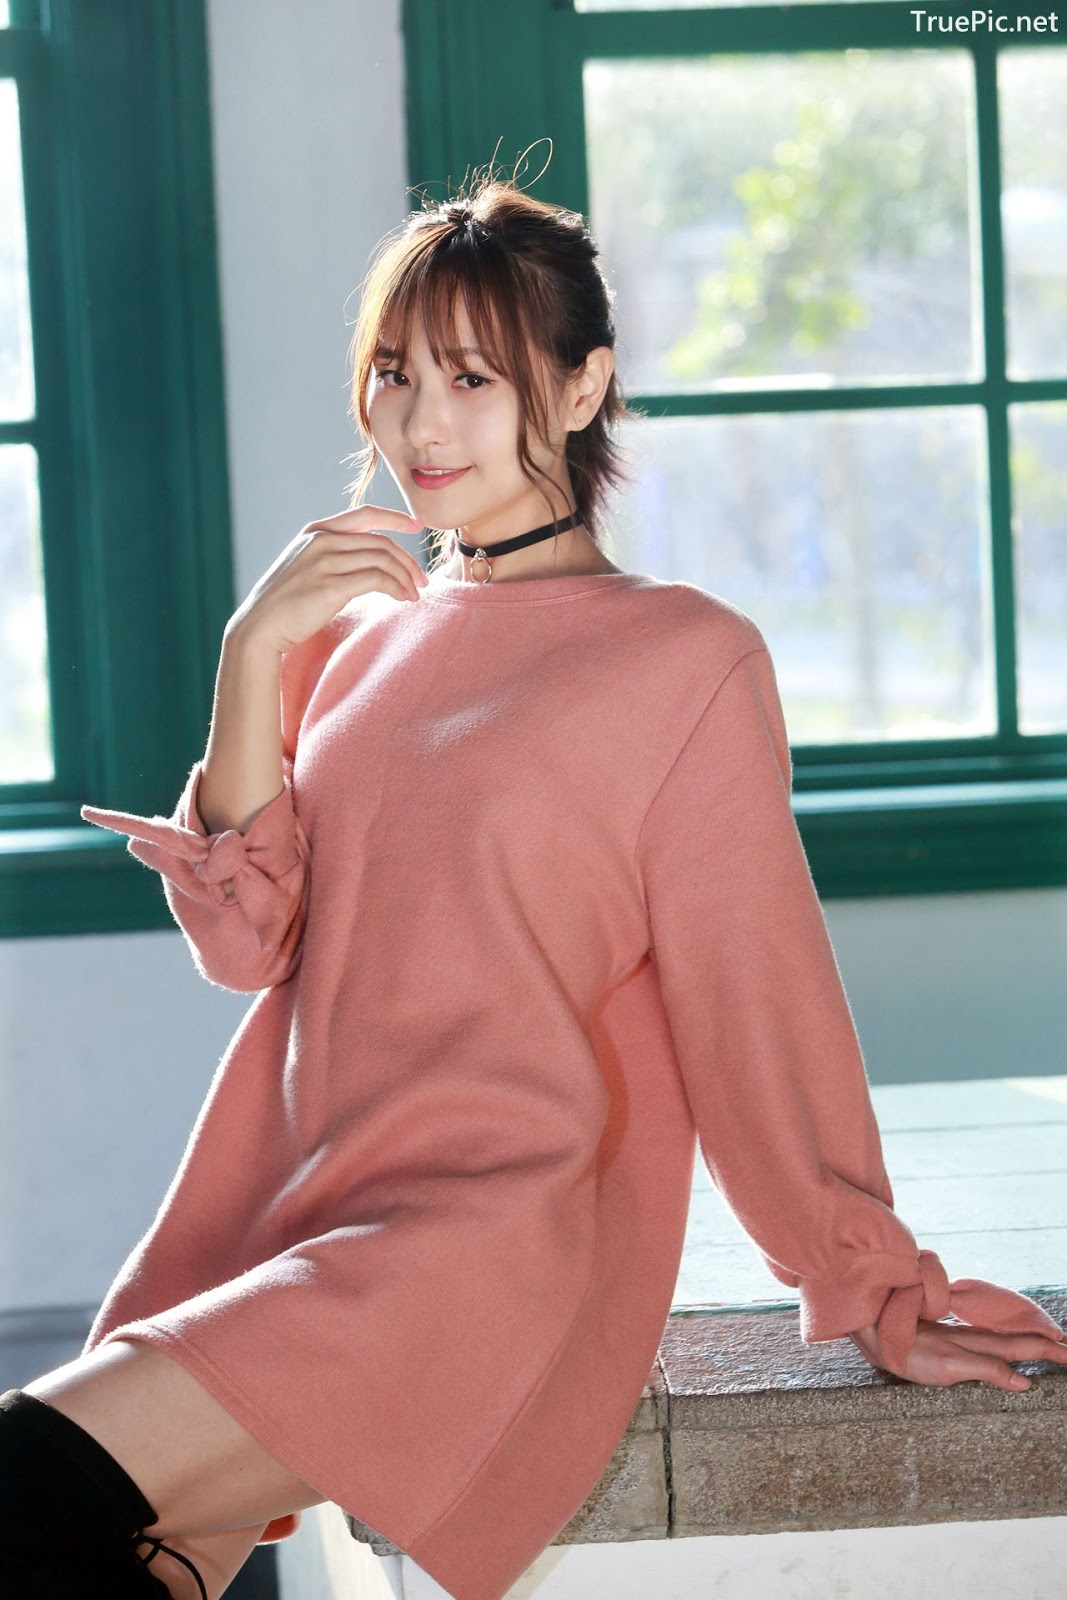 Image-Taiwanese-Model-郭思敏-Pure-And-Gorgeous-Girl-In-Pink-Sweater-Dress-TruePic.net- Picture-43